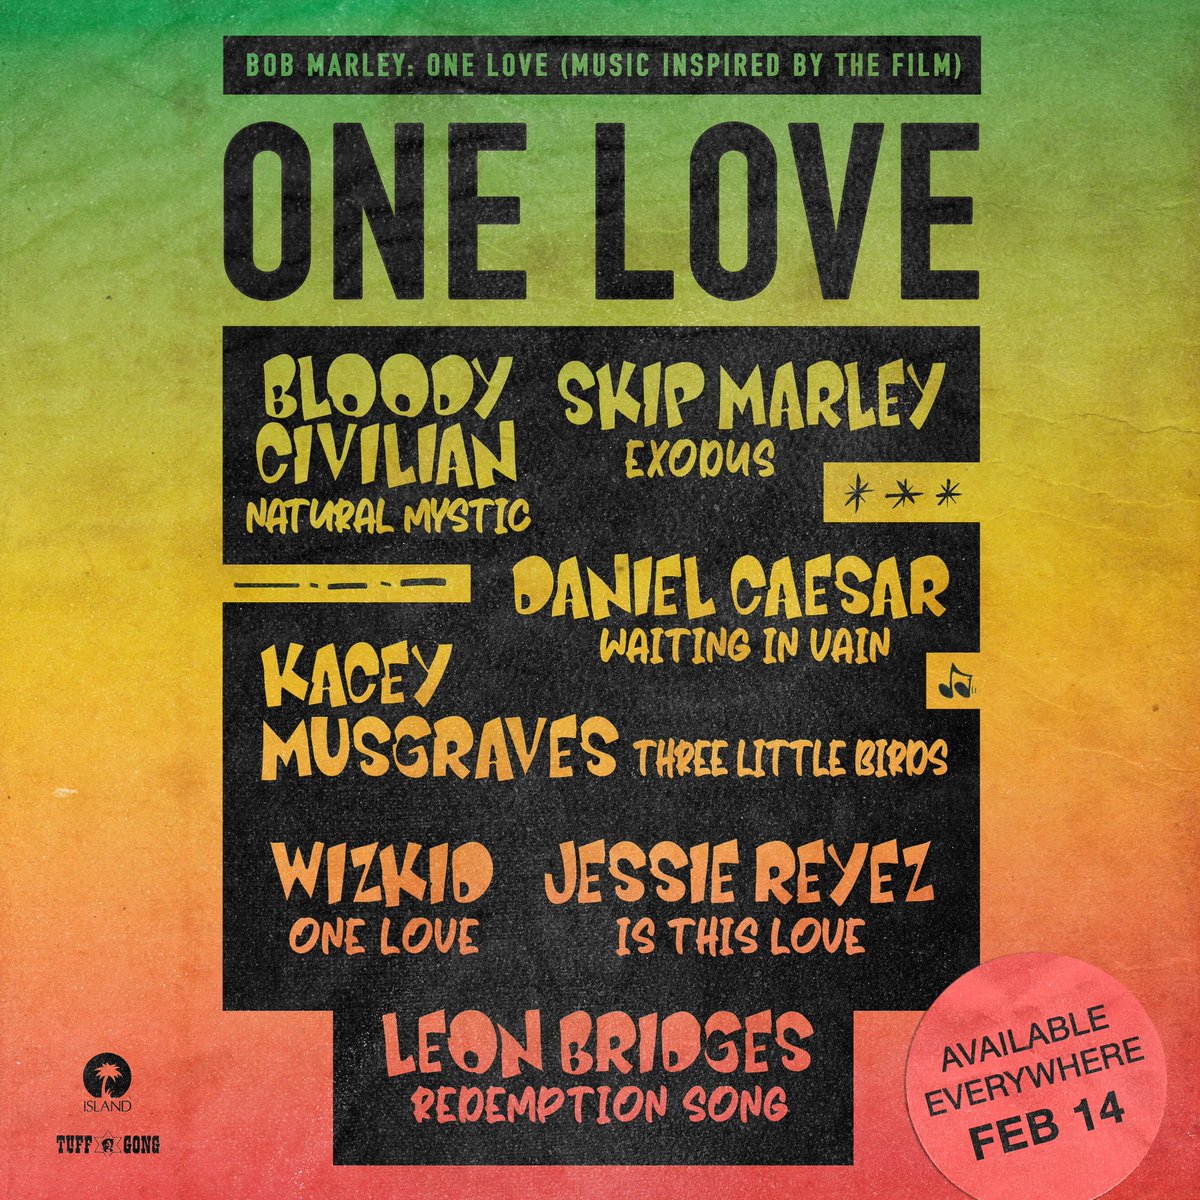 It’s an honor to play a part in telling this story. @bobmarley’s music continues to inspire every day 🙏🏽  “One Love” EP soon come 🦁 available everywhere on Feb 14 💛 #BobMarleyOneLove #OneLove @OneLoveMovie